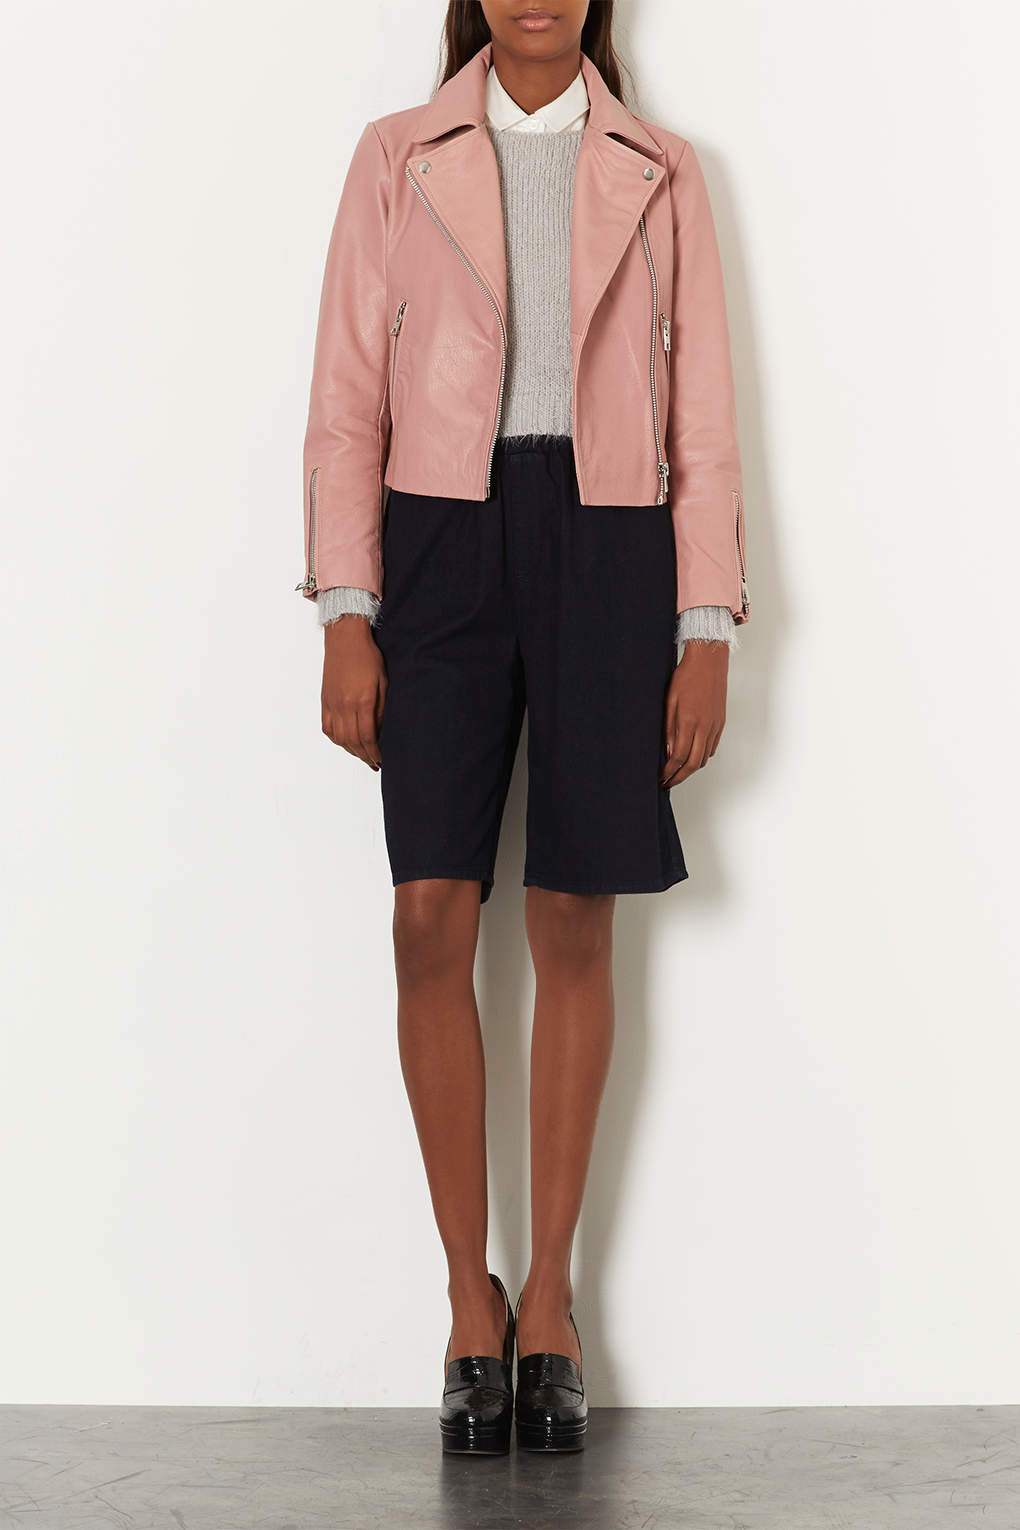 Topshop Boxy Leather Biker Jacket in Pink | Lyst